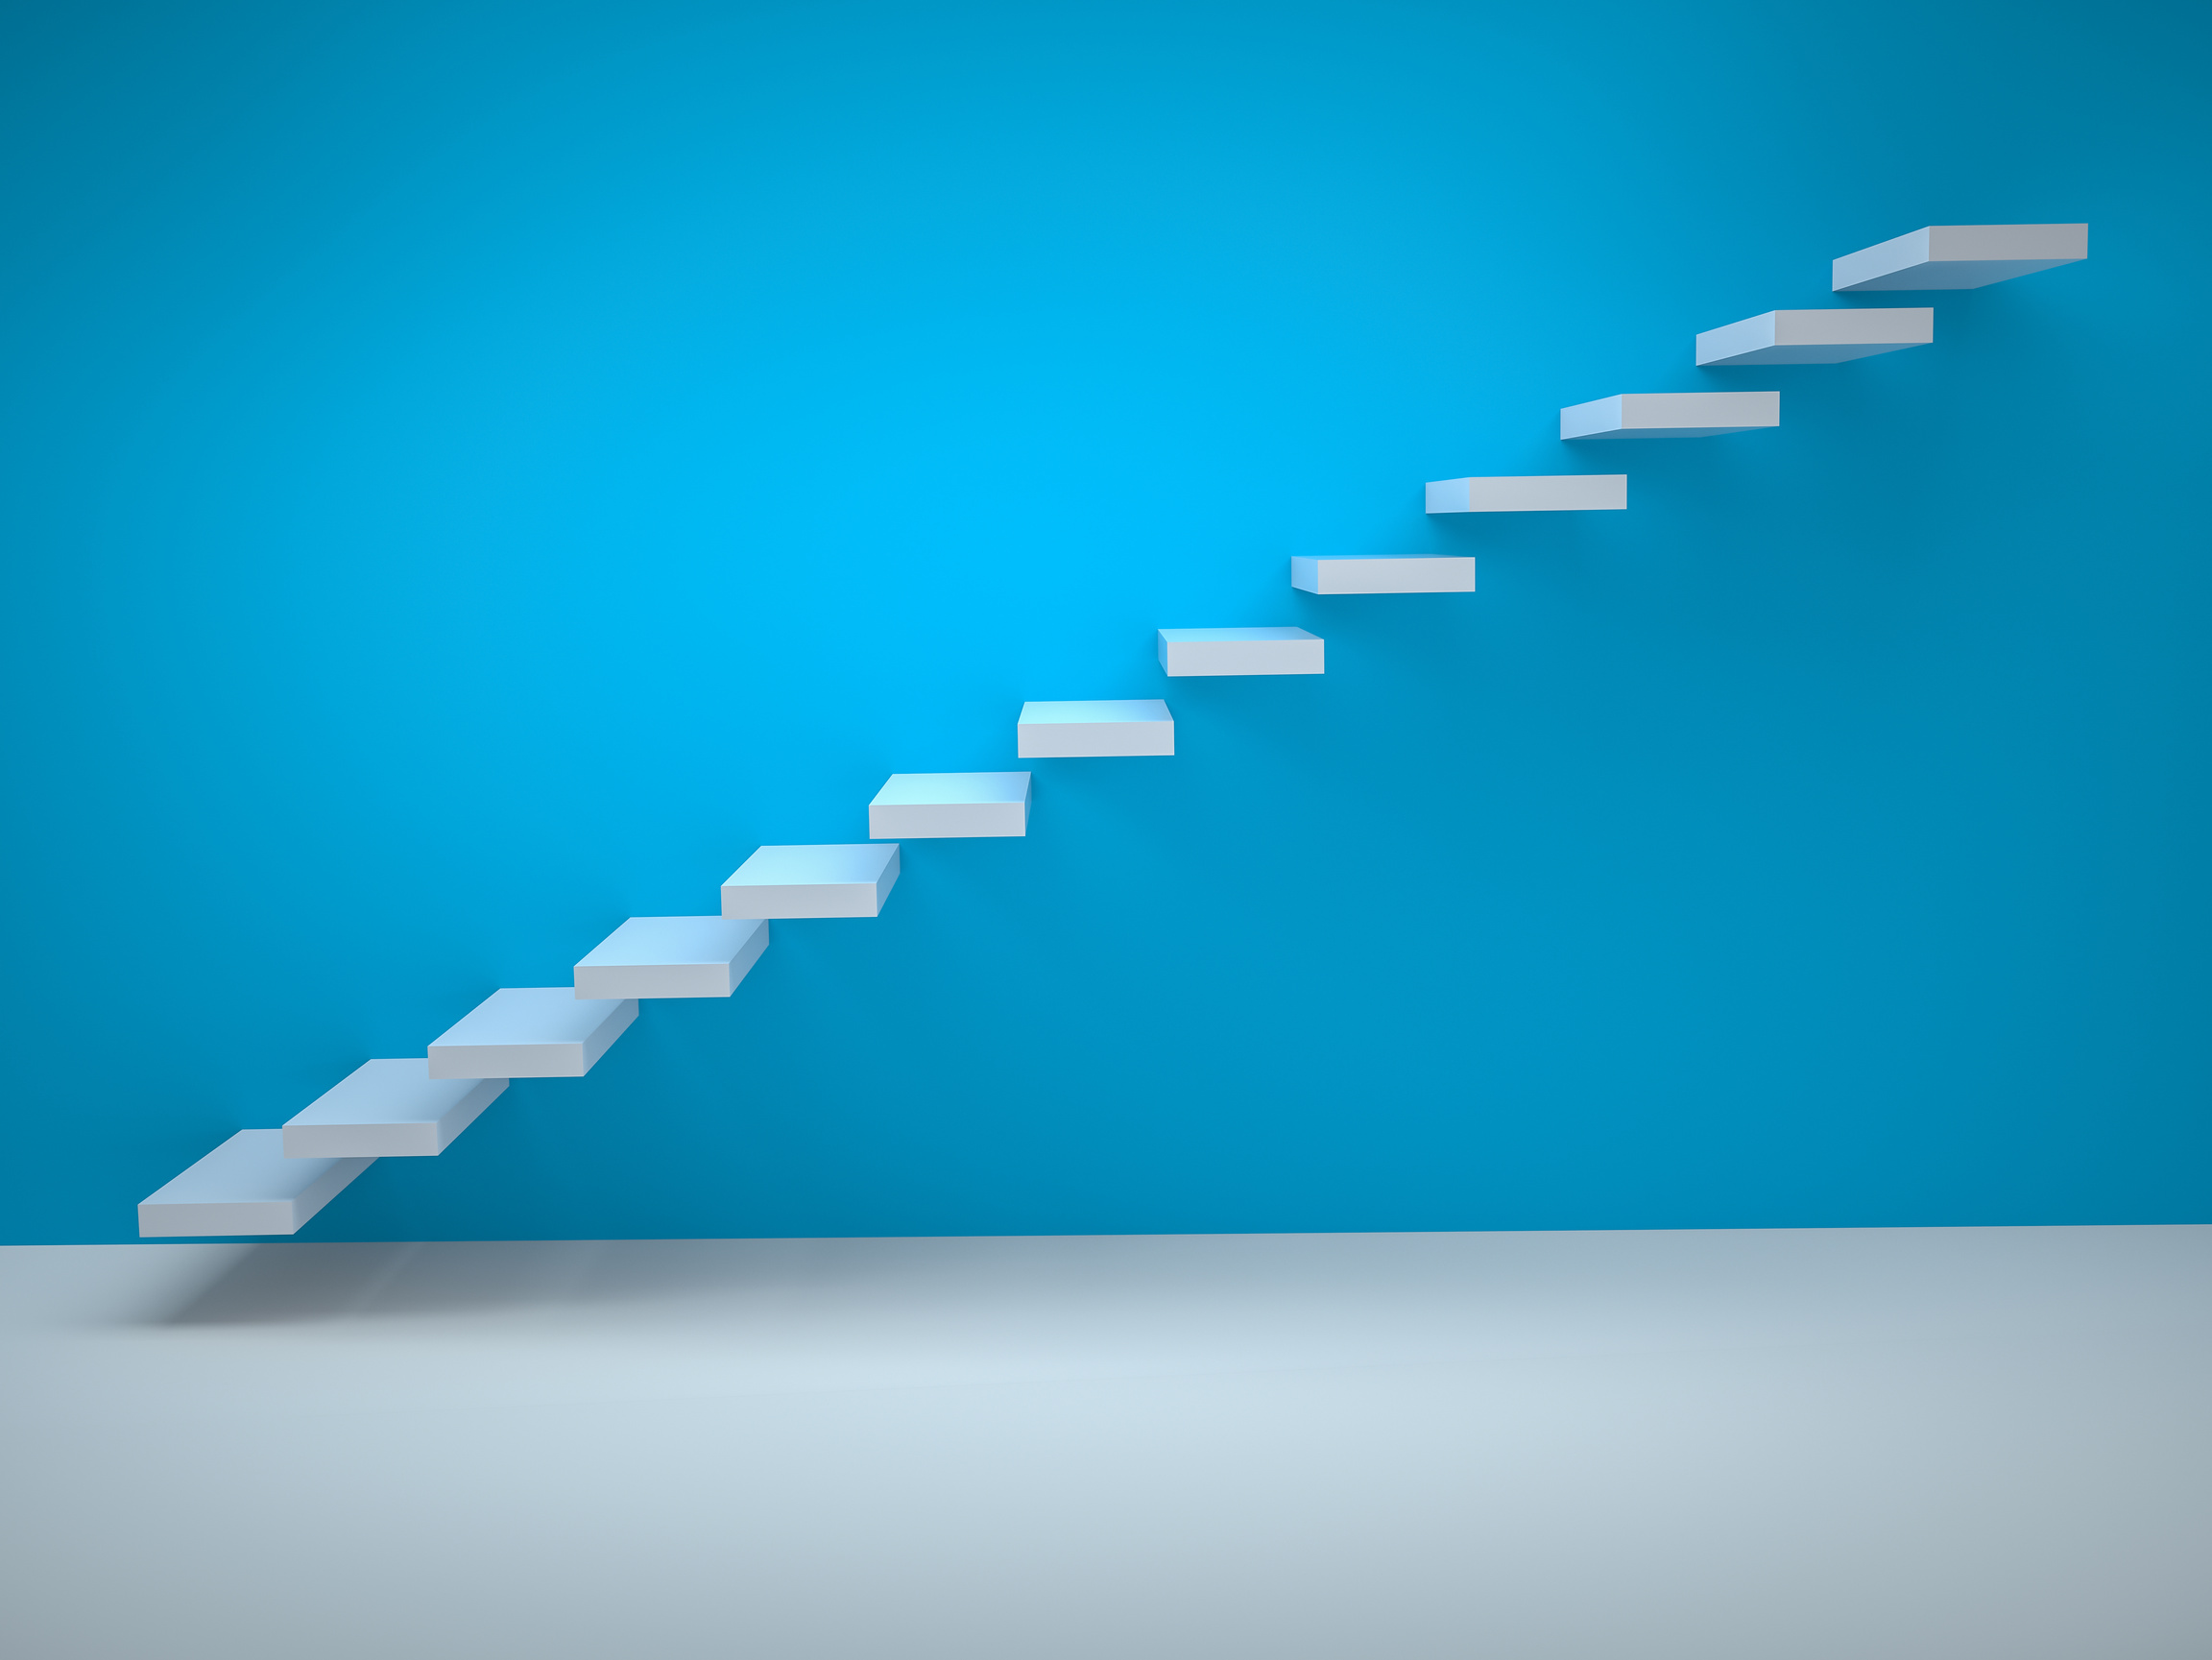 Simple stair icon on blue background